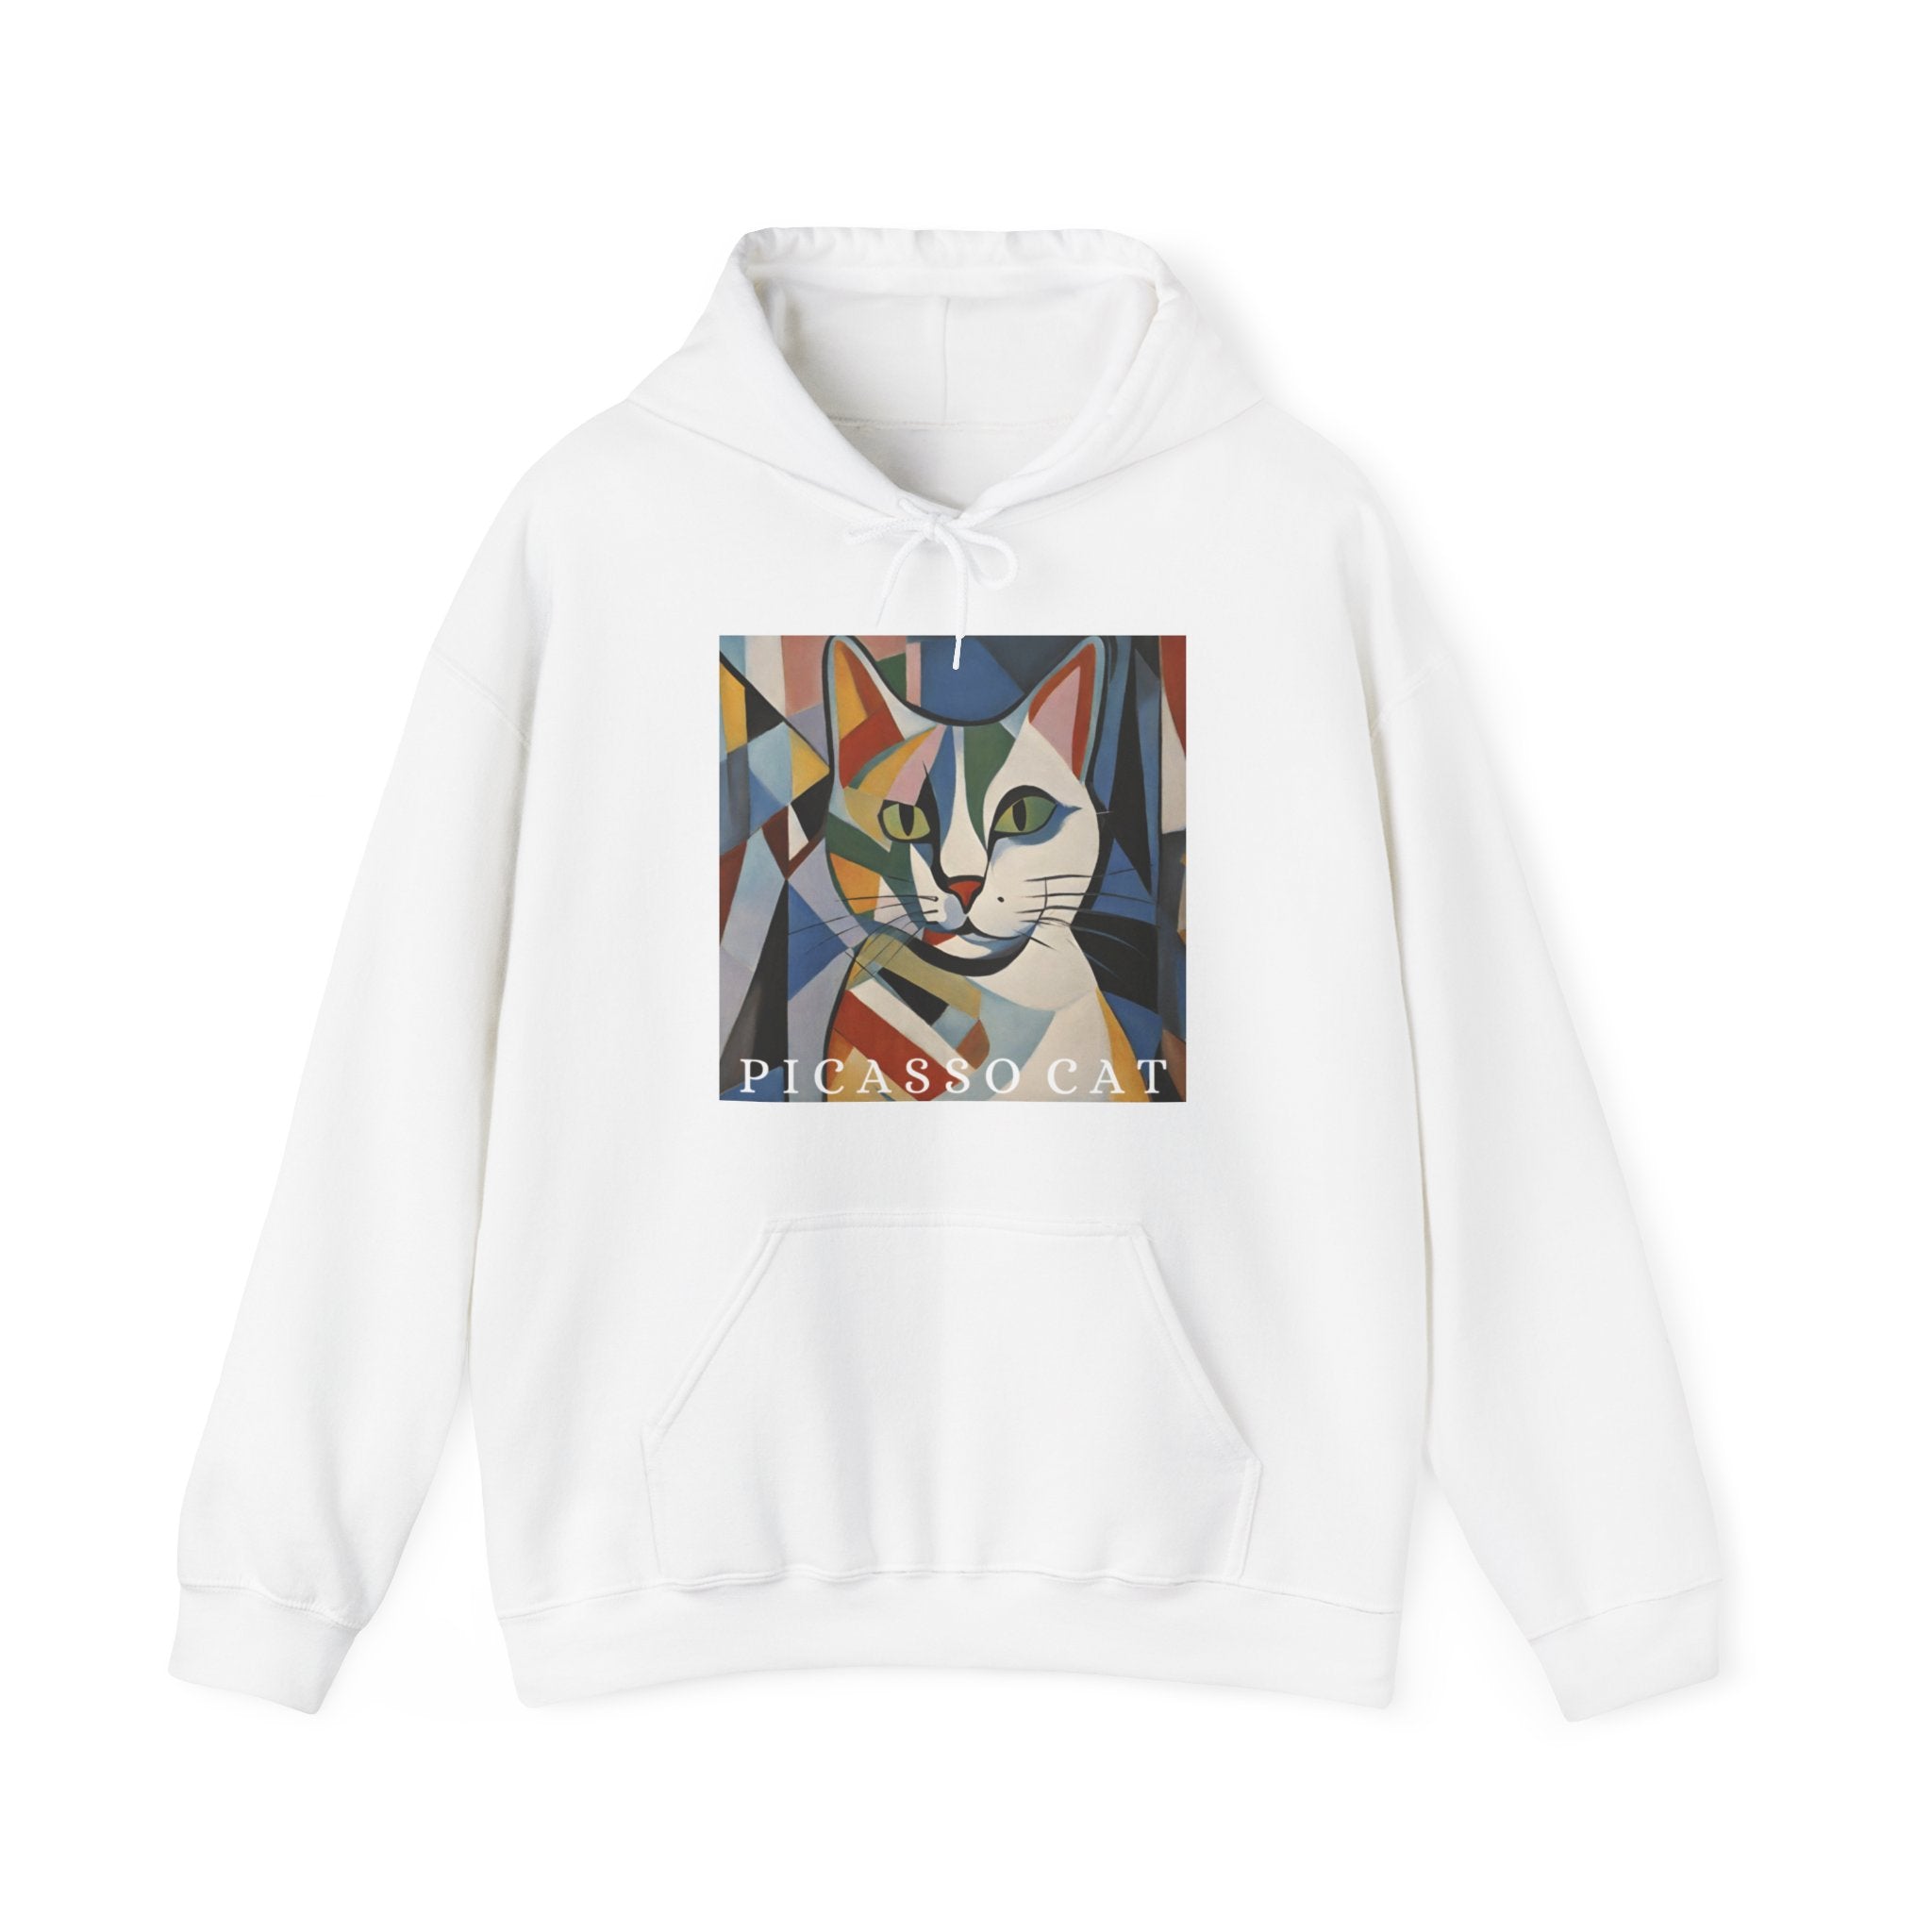 Your Cat is a Picasso Sweatshirt